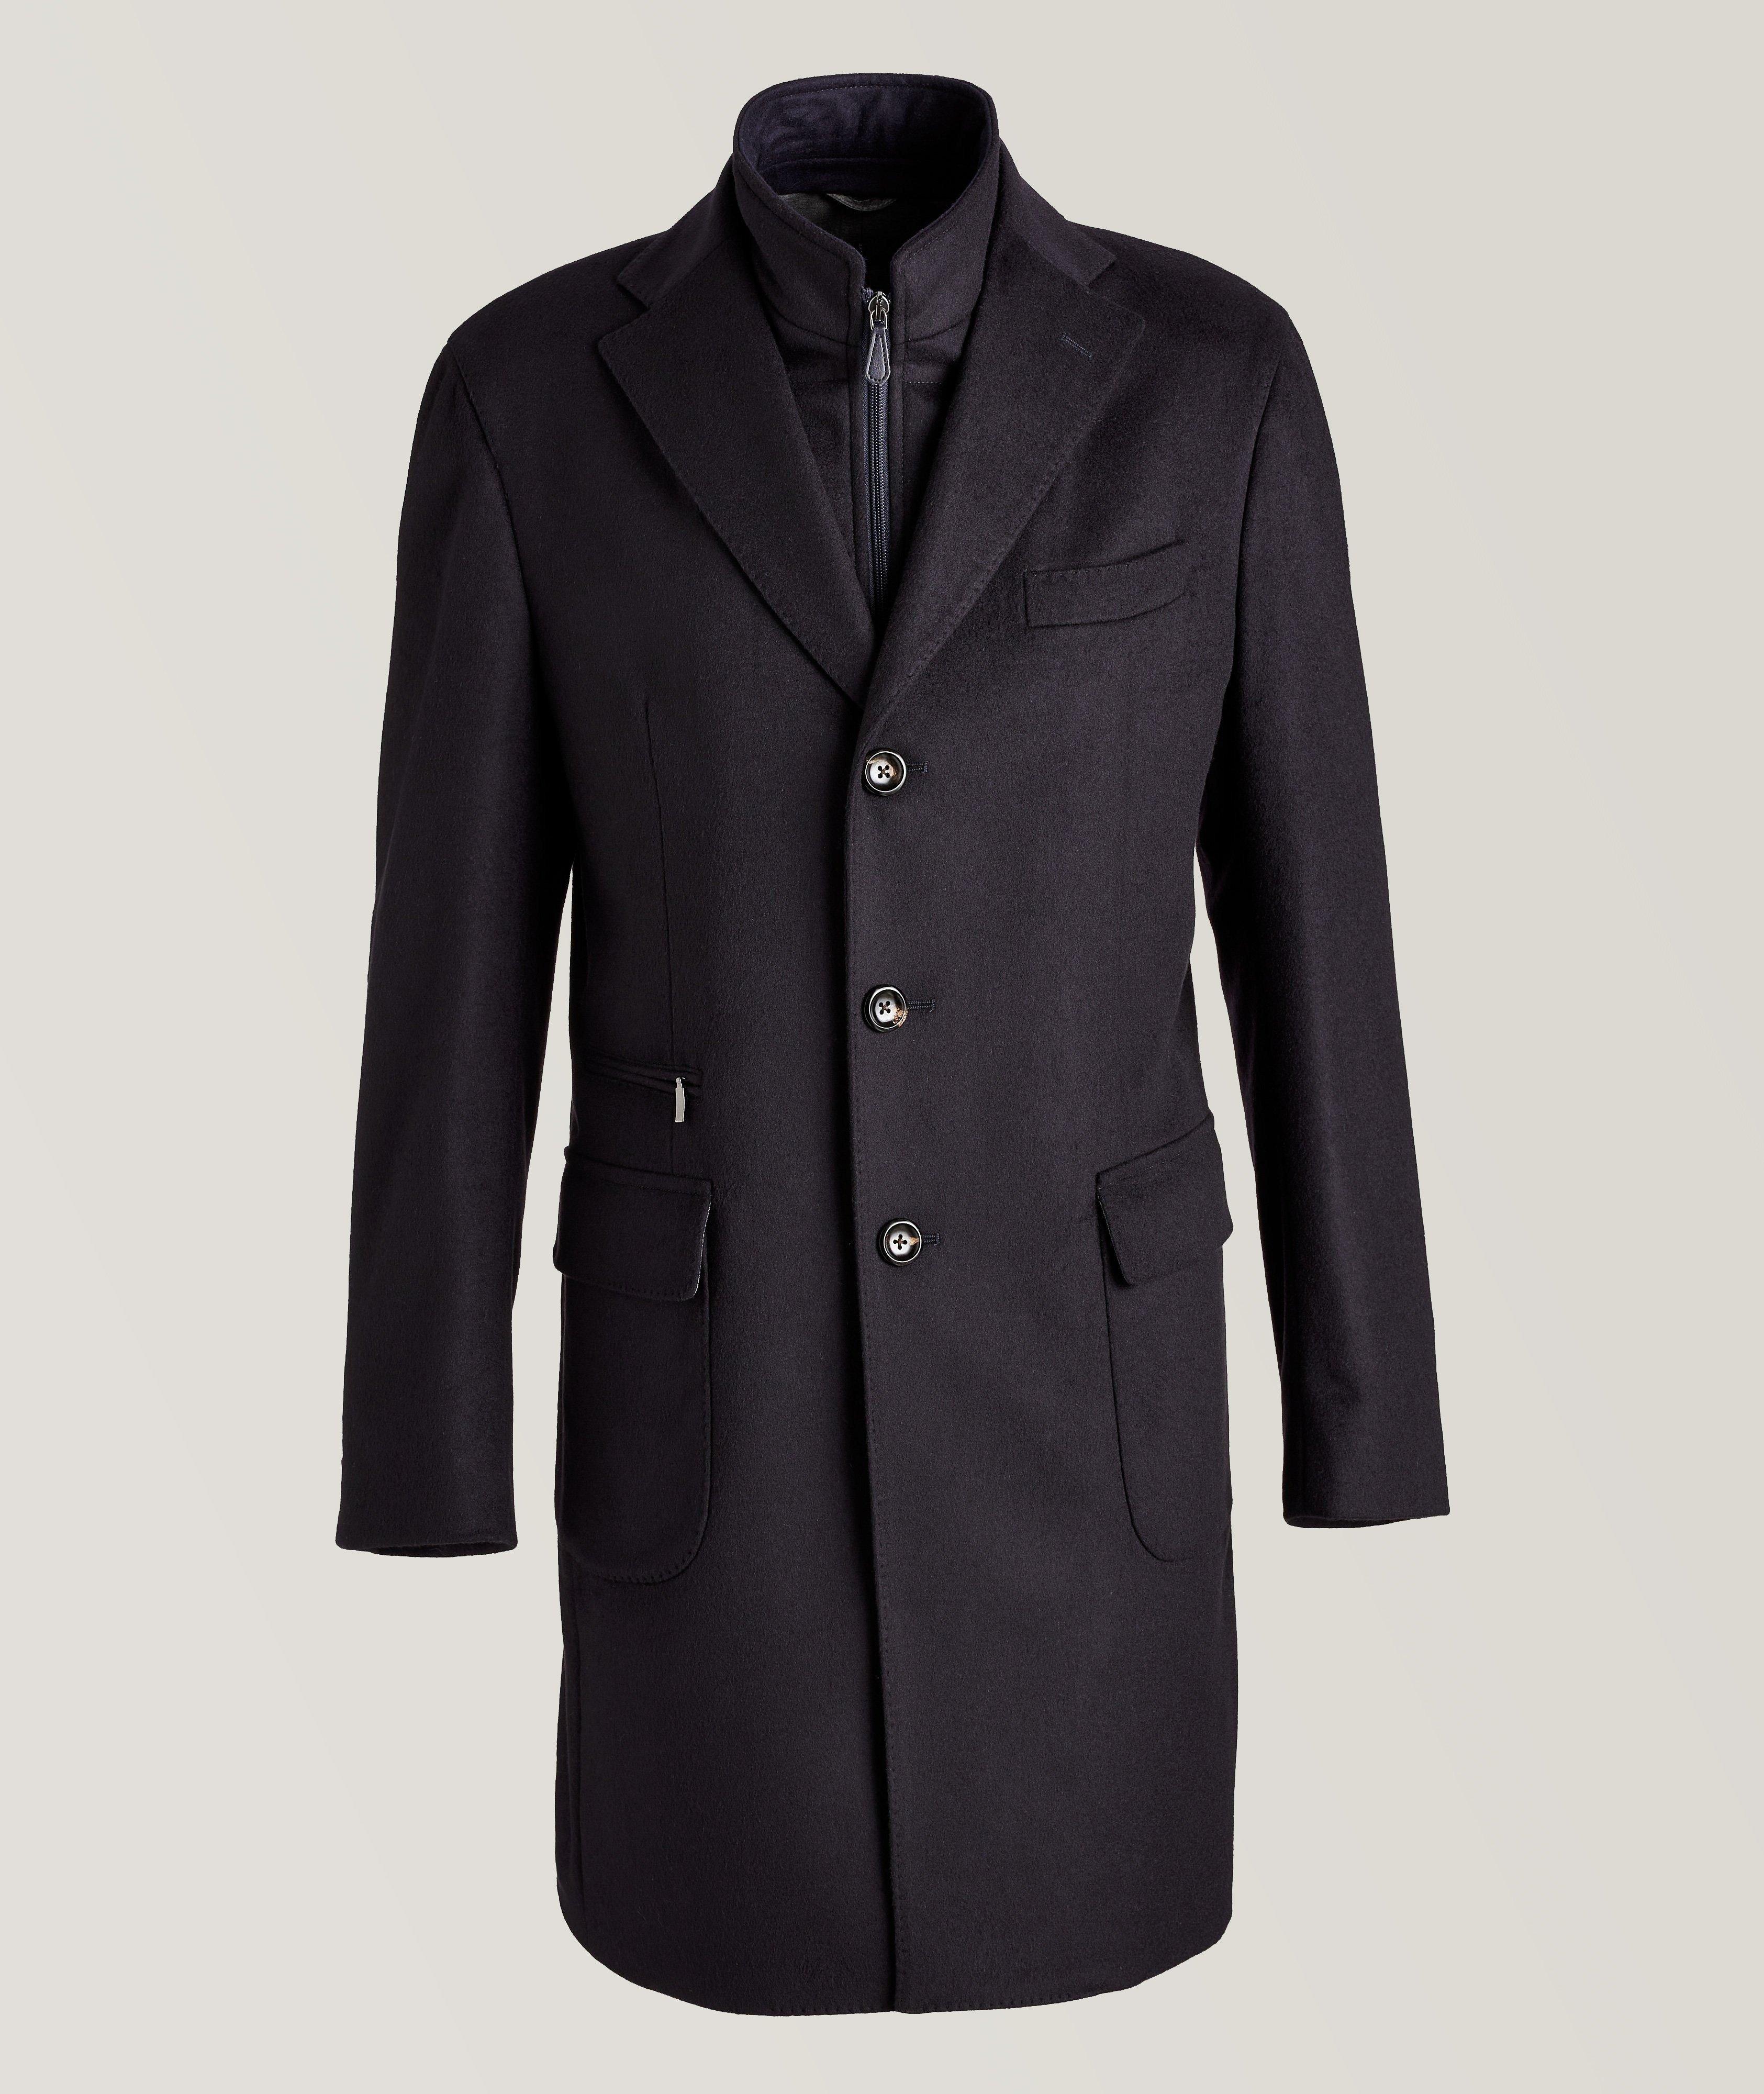 Wool-Cashmere Overcoat  image 0